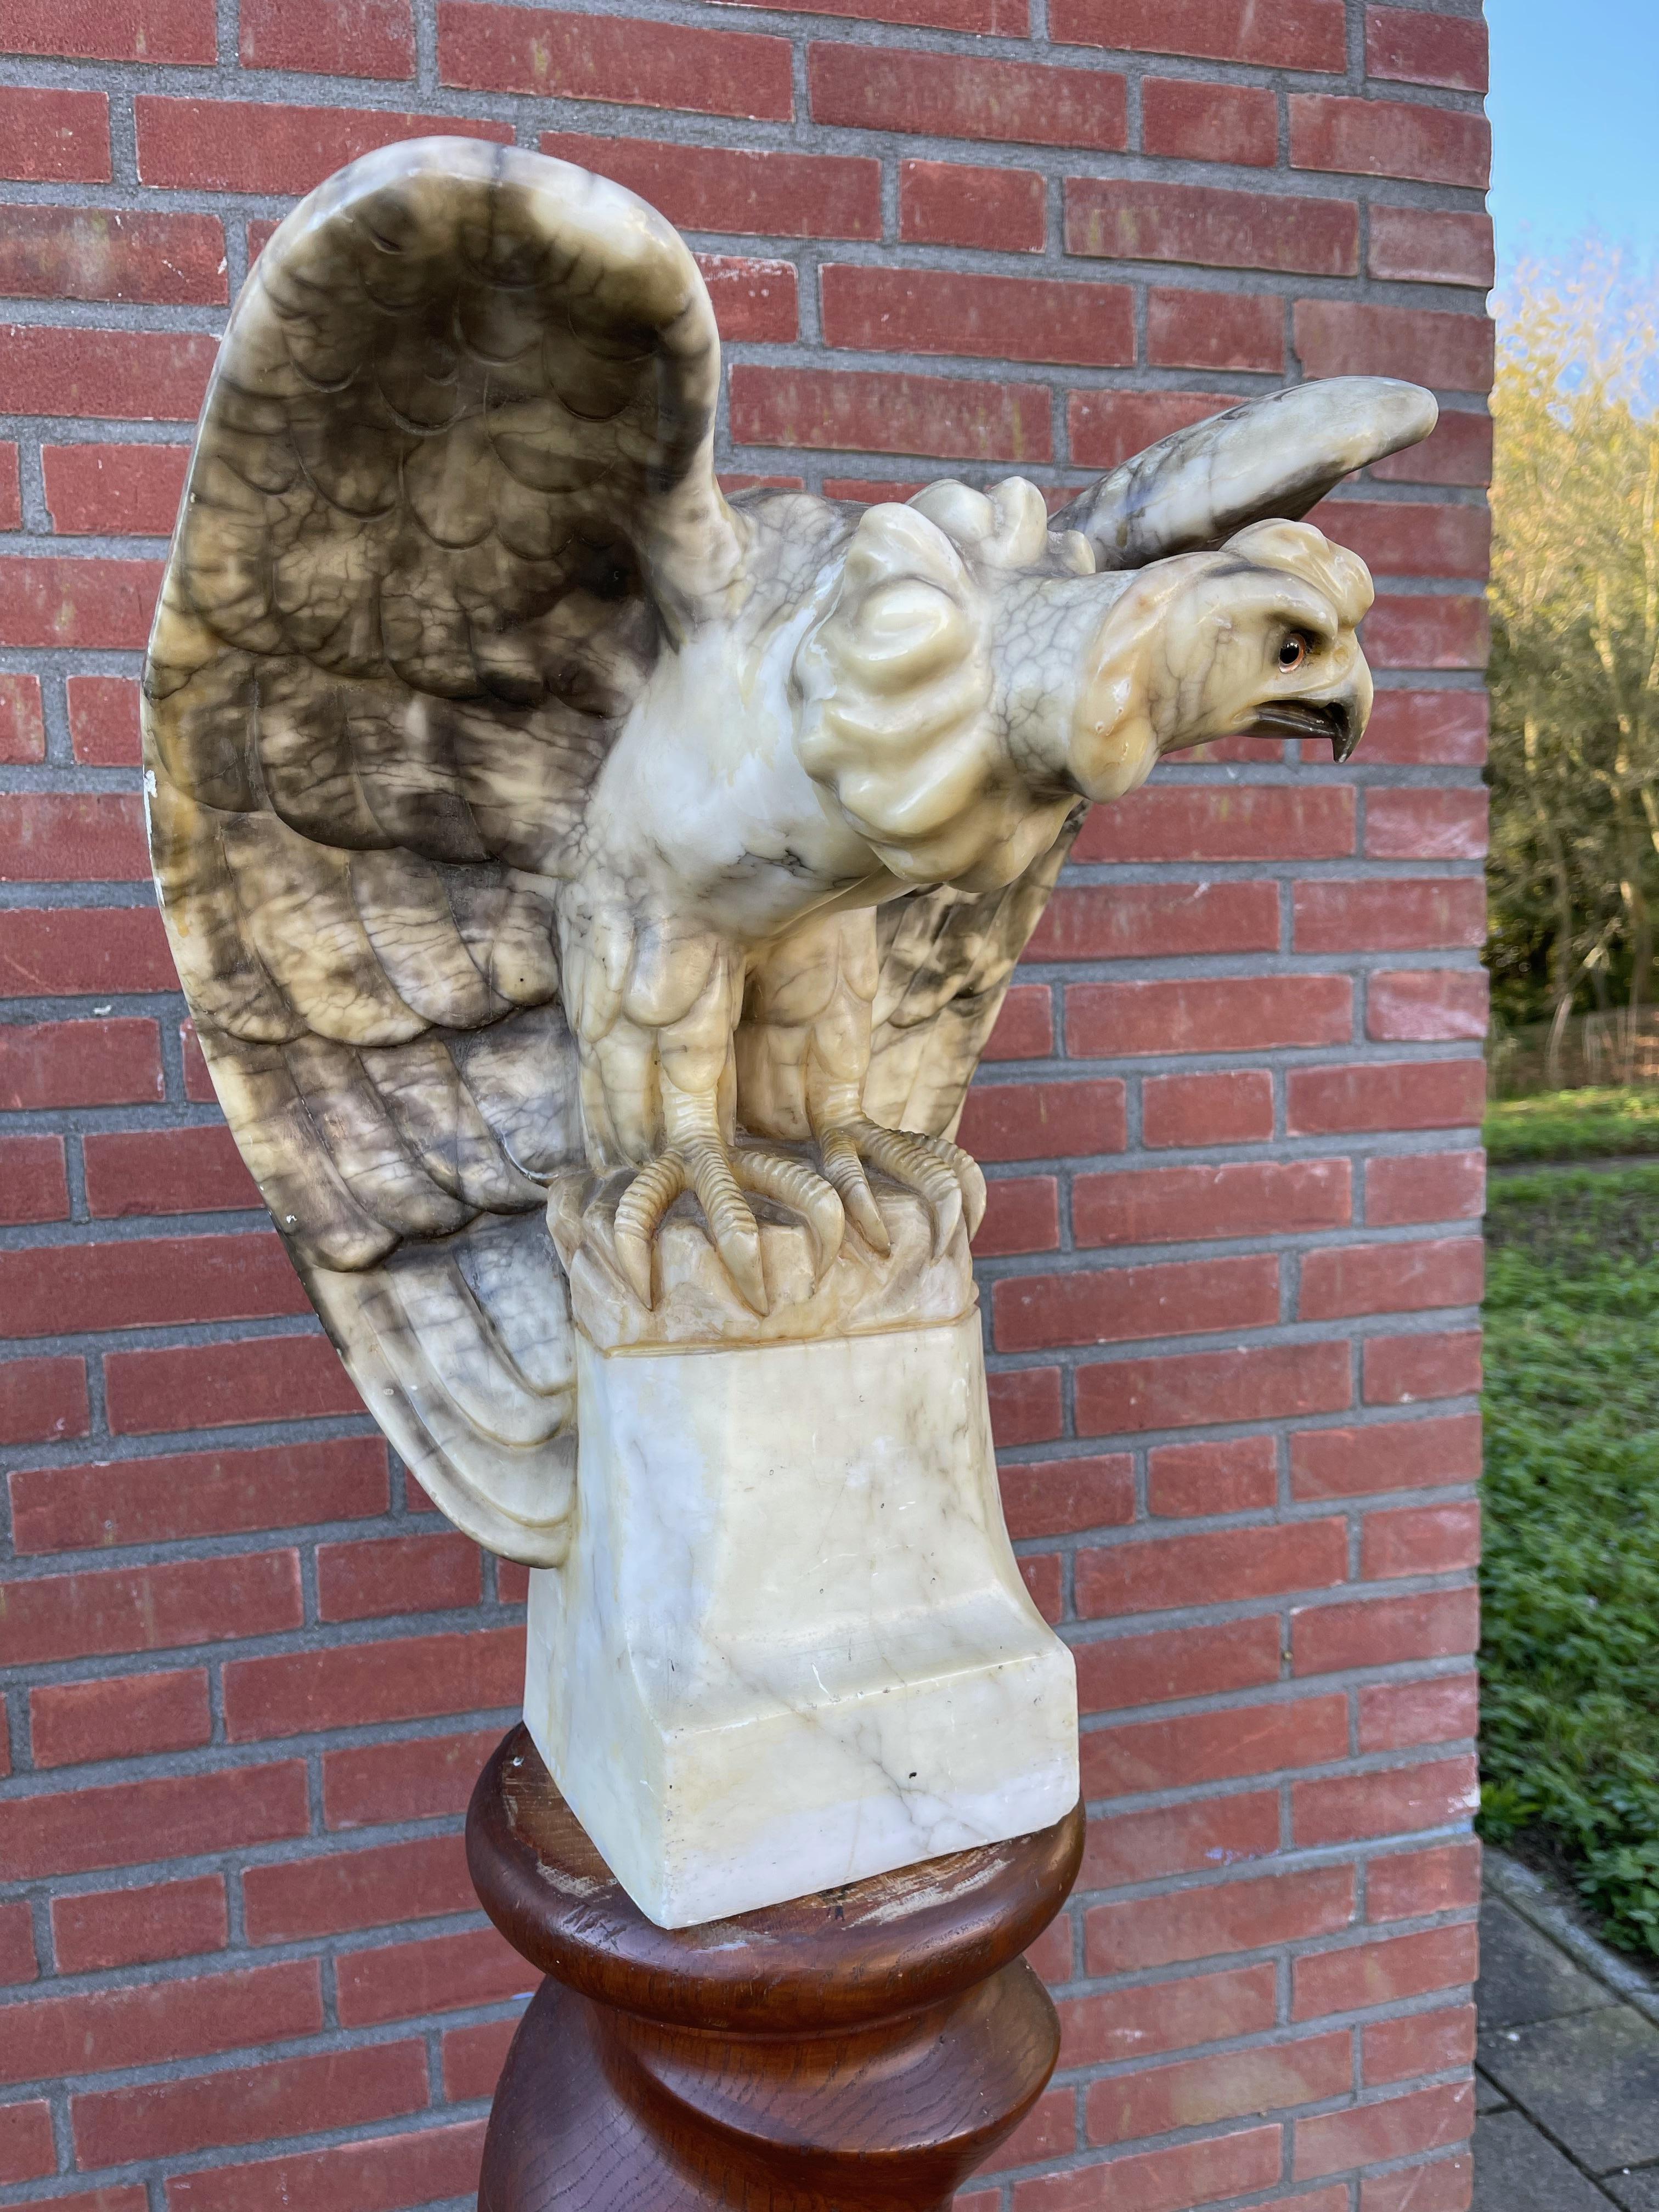 Magnificent alabaster sculpture of what we believe is the Harpy eagle.

Carving anything even remotely realistic out of a mineral stone rock like alabaster for almost everyone in the world is extremely difficult, if not impossible. However, in the